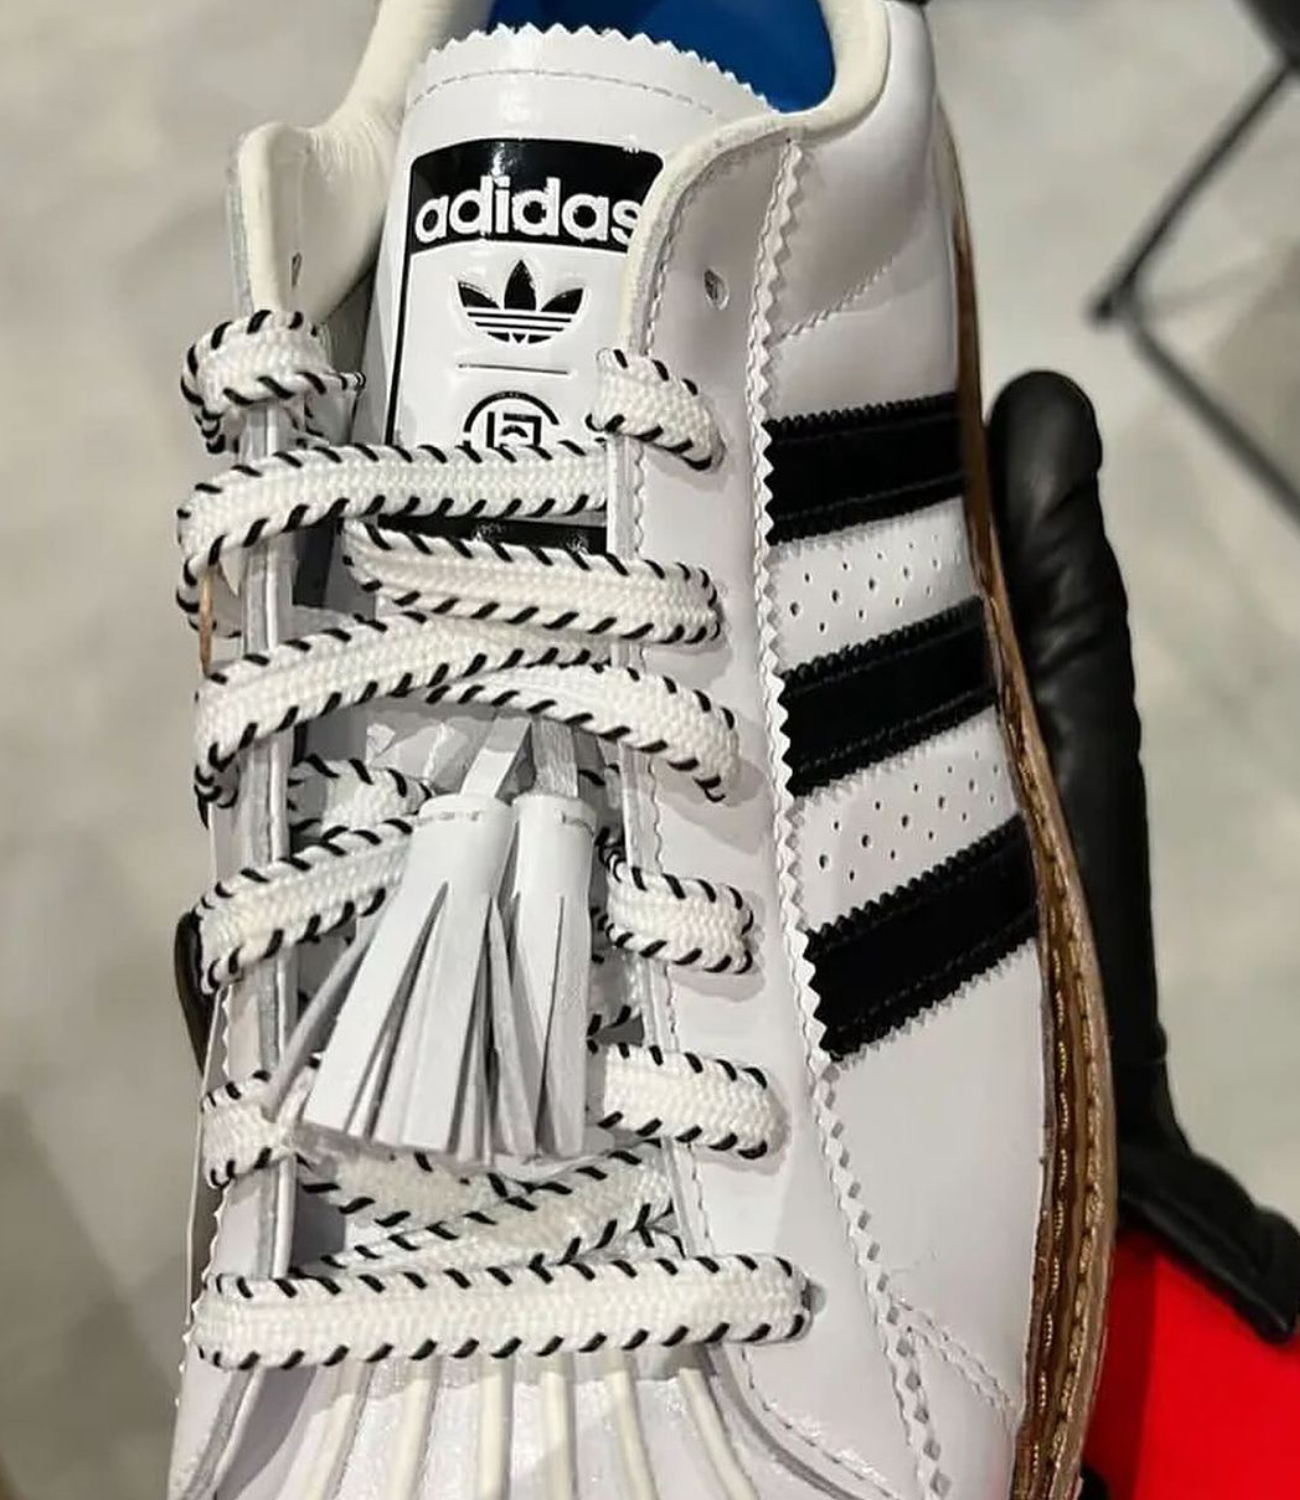 CLOT's Formal adidas Superstar Shoes Are Better Up Close